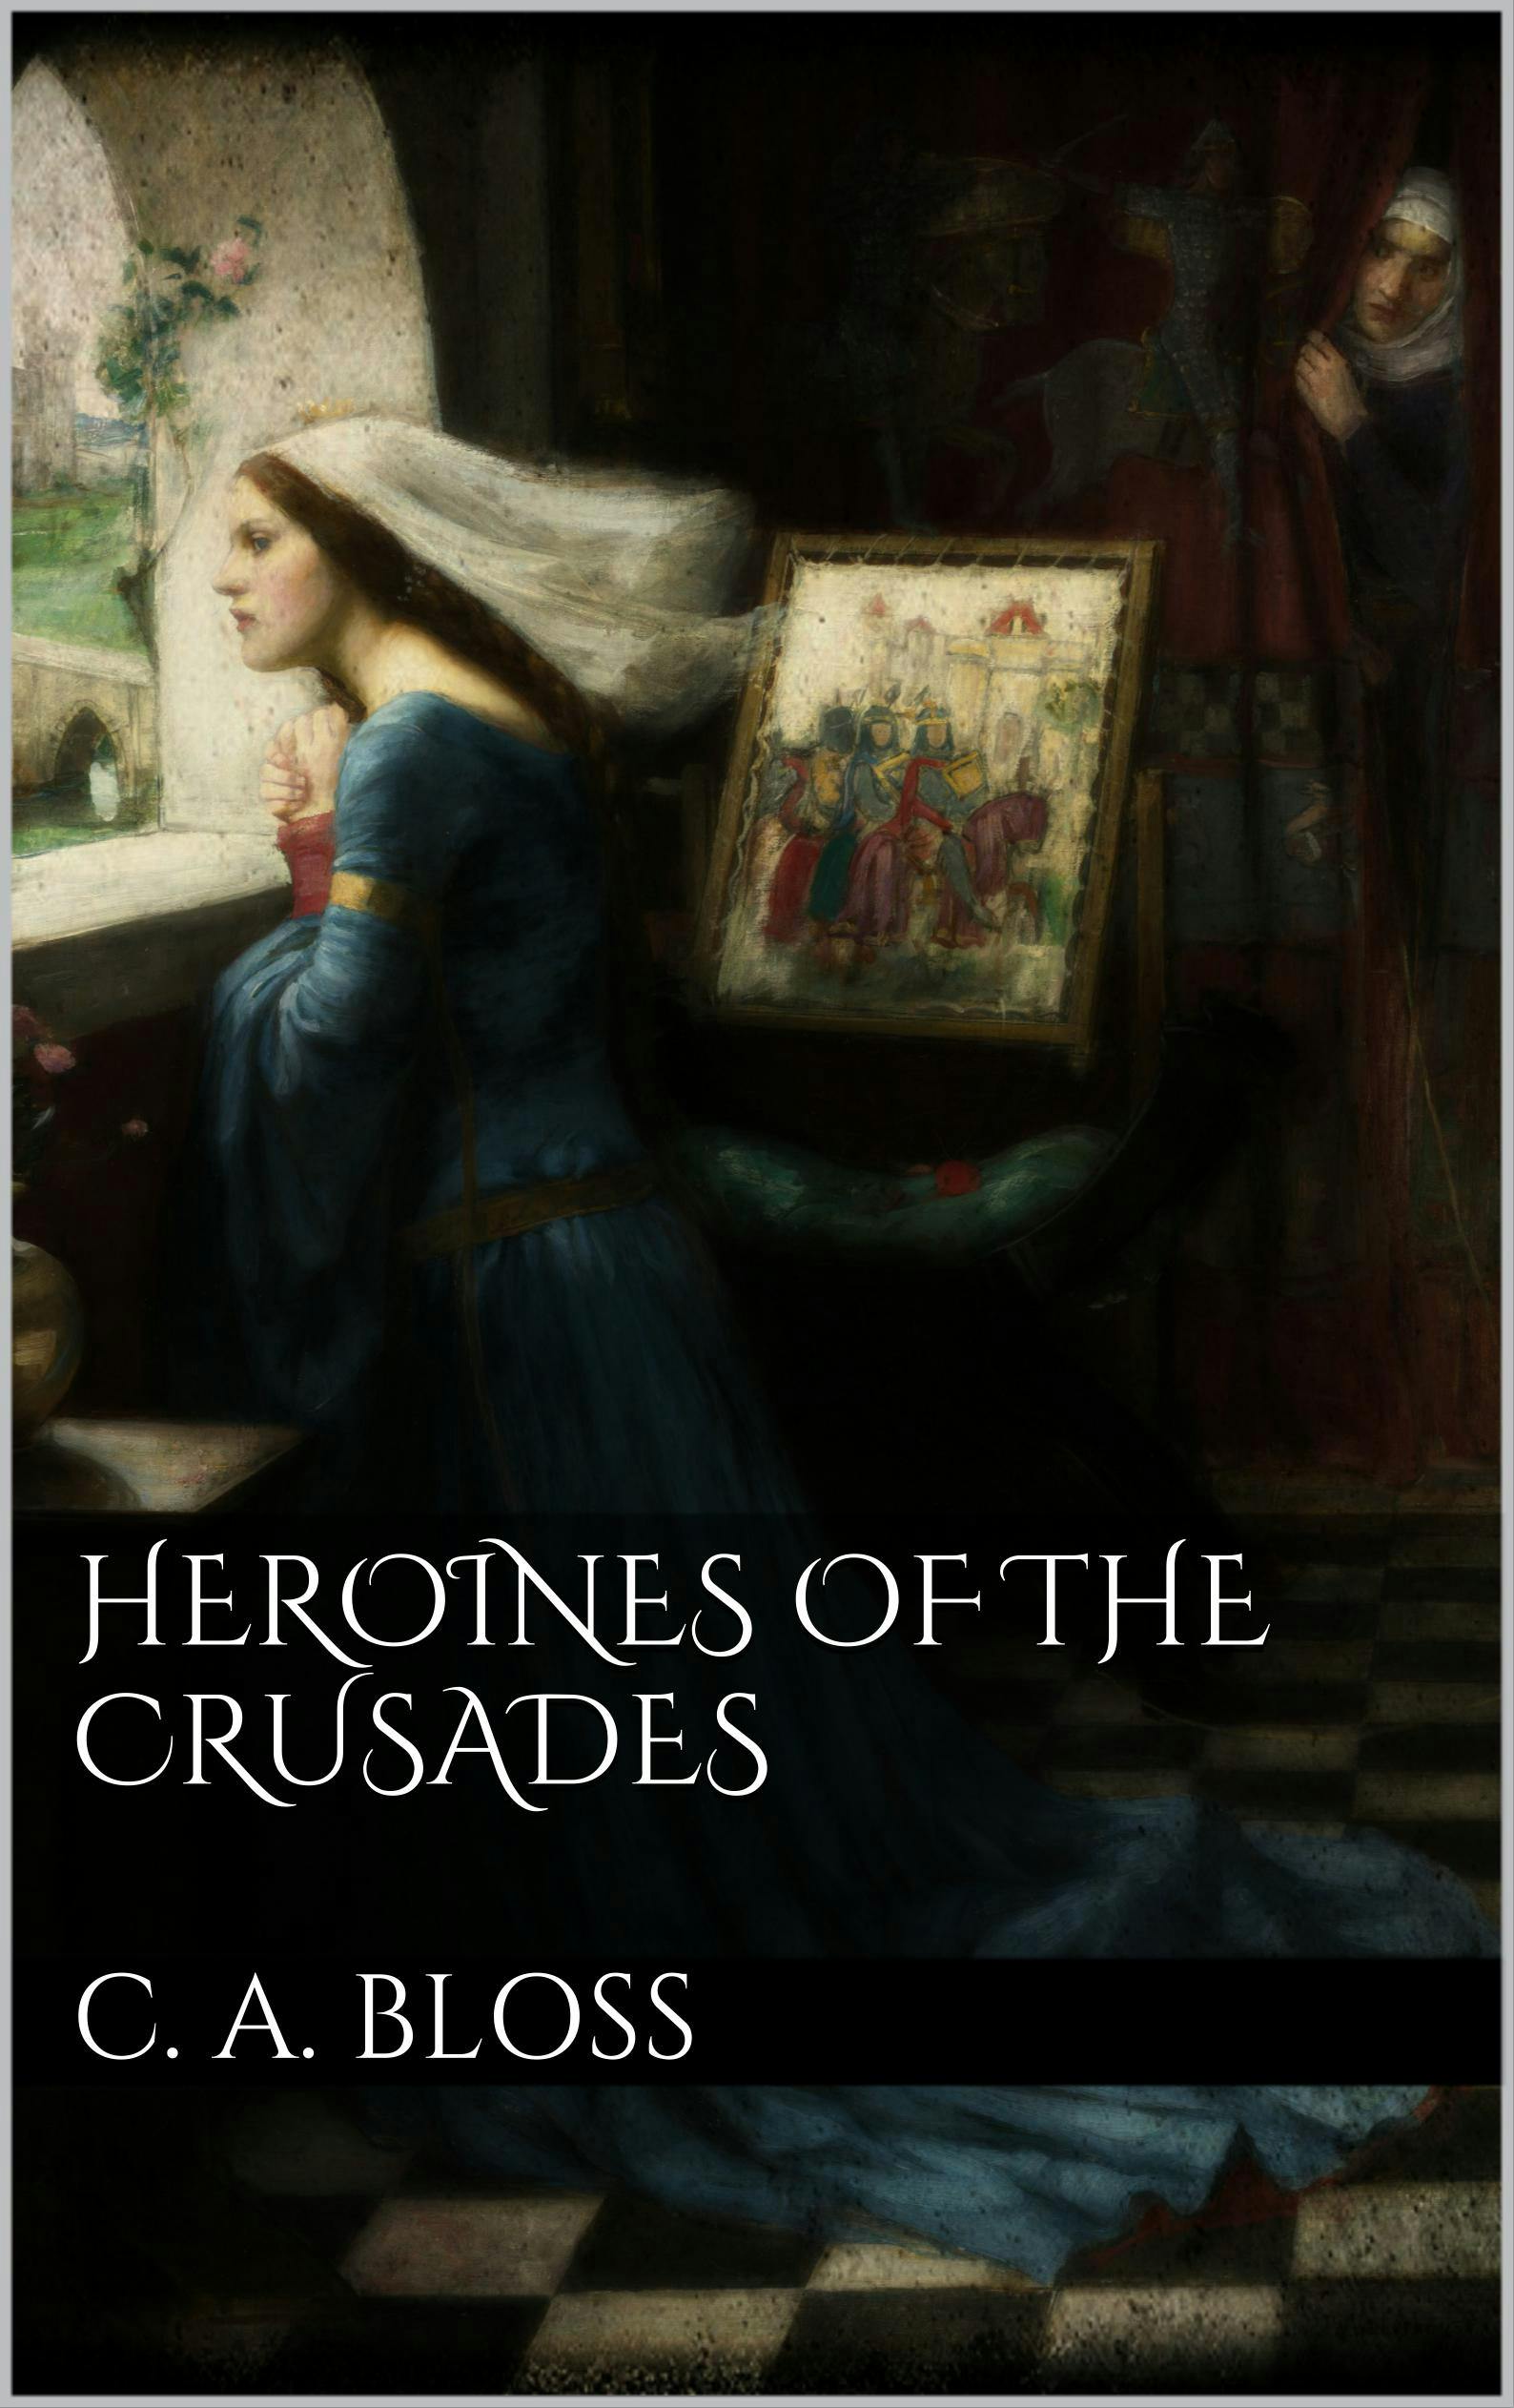 Heroines of the Crusades - C. A. Bloss